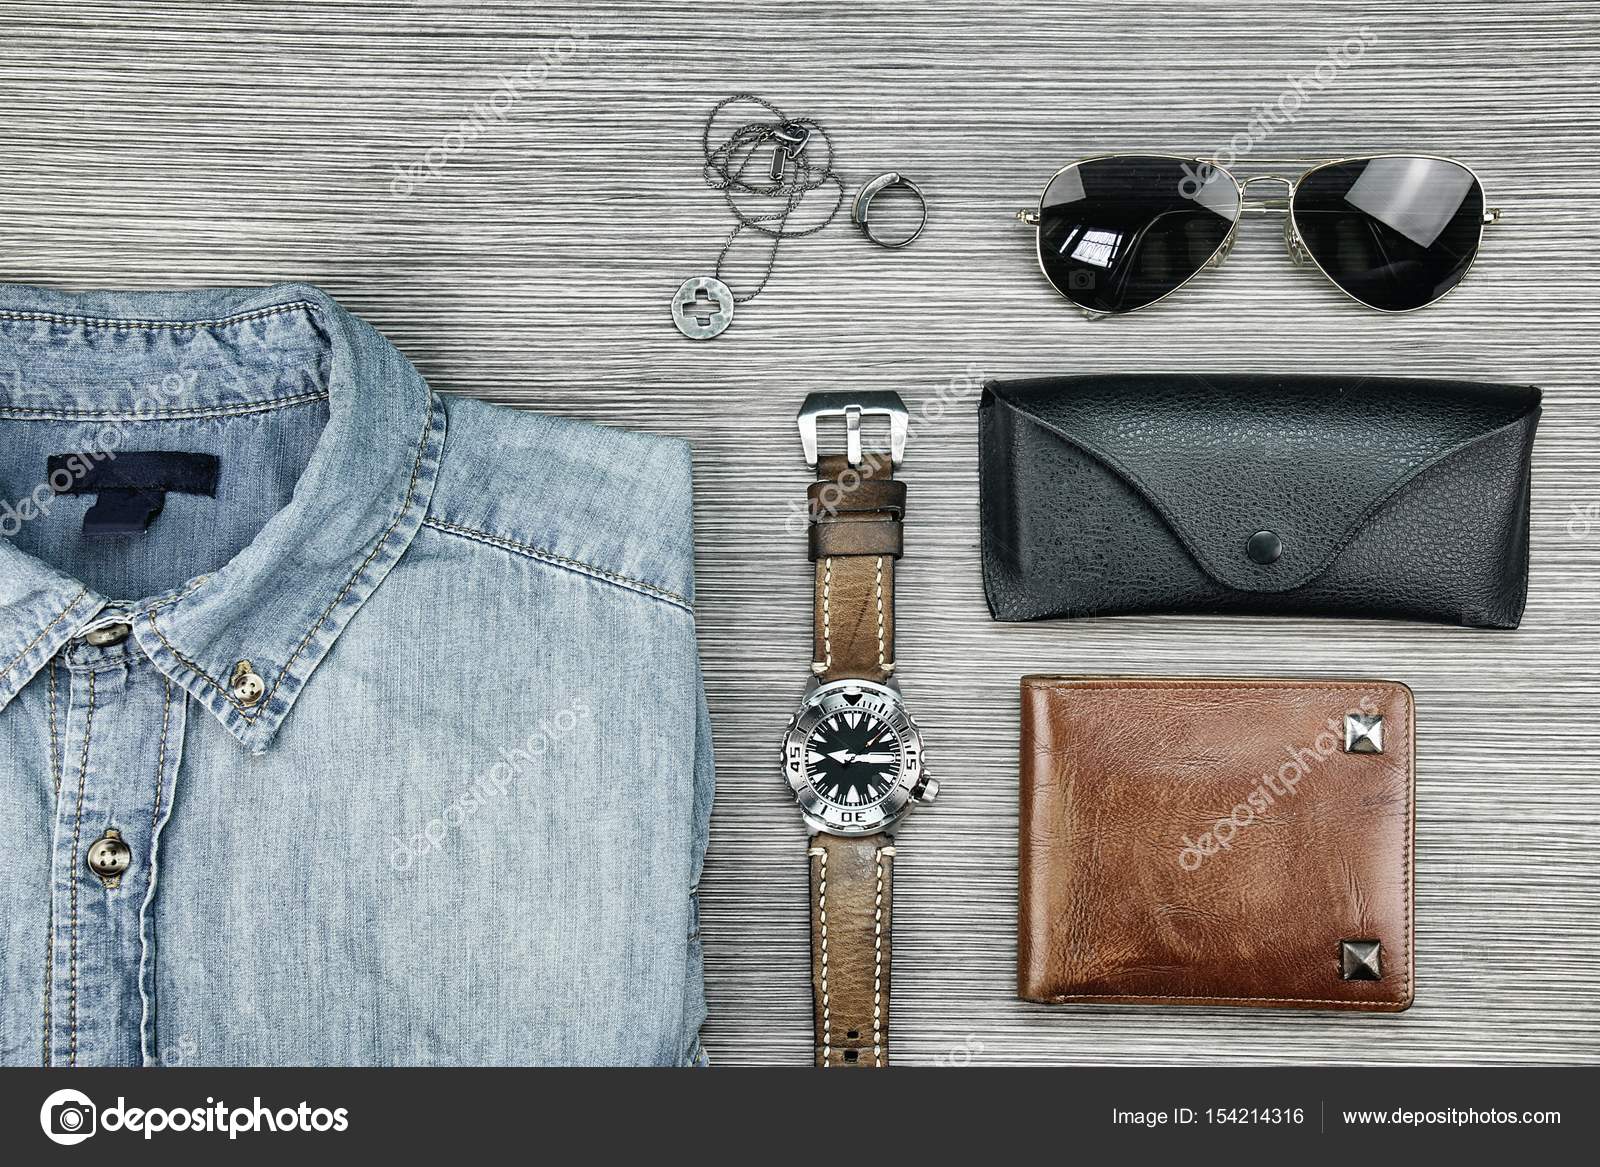 Men accessories and fashion, Set of clothes and various accessories, Trendy  Hipster style outfits, Jeans. — Stock Photo © Artfully79 #154214316